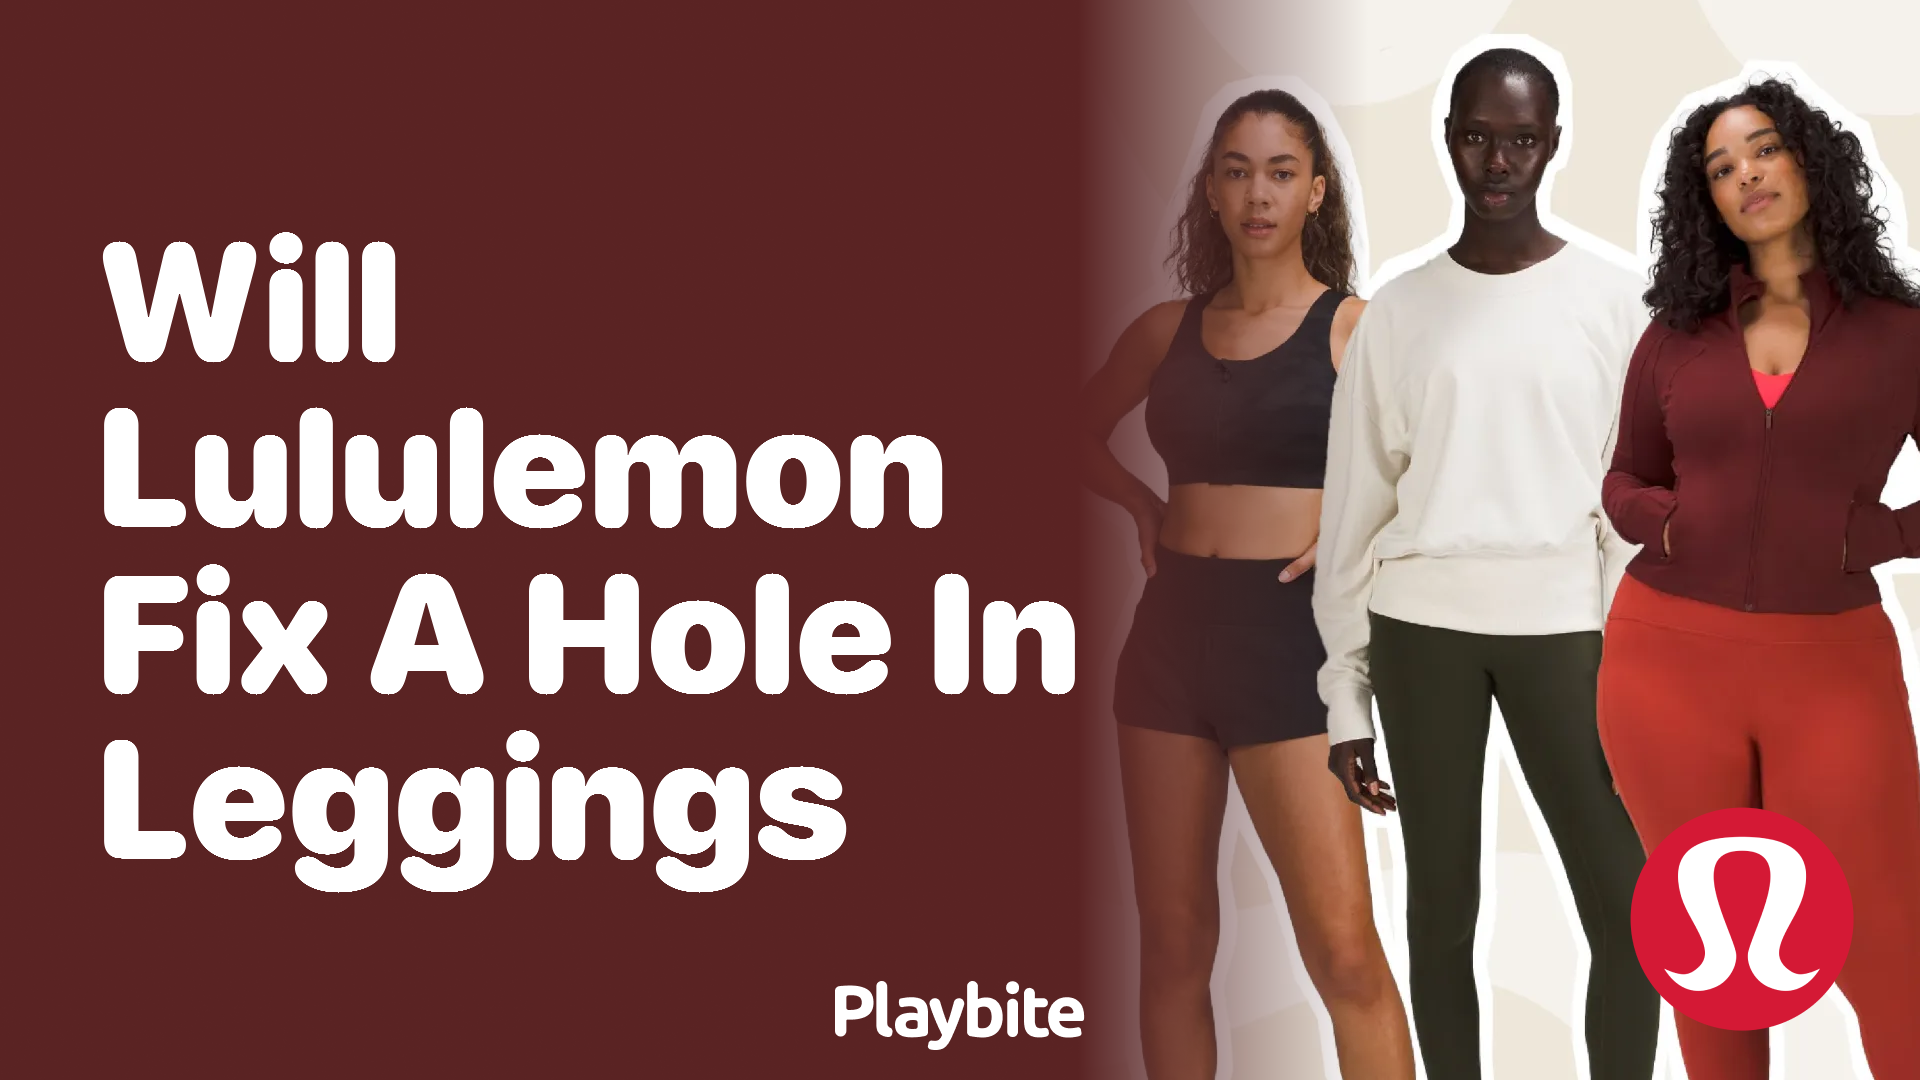 Will Lululemon Fix a Hole in Your Leggings? Here's What You Need to Know! -  Playbite